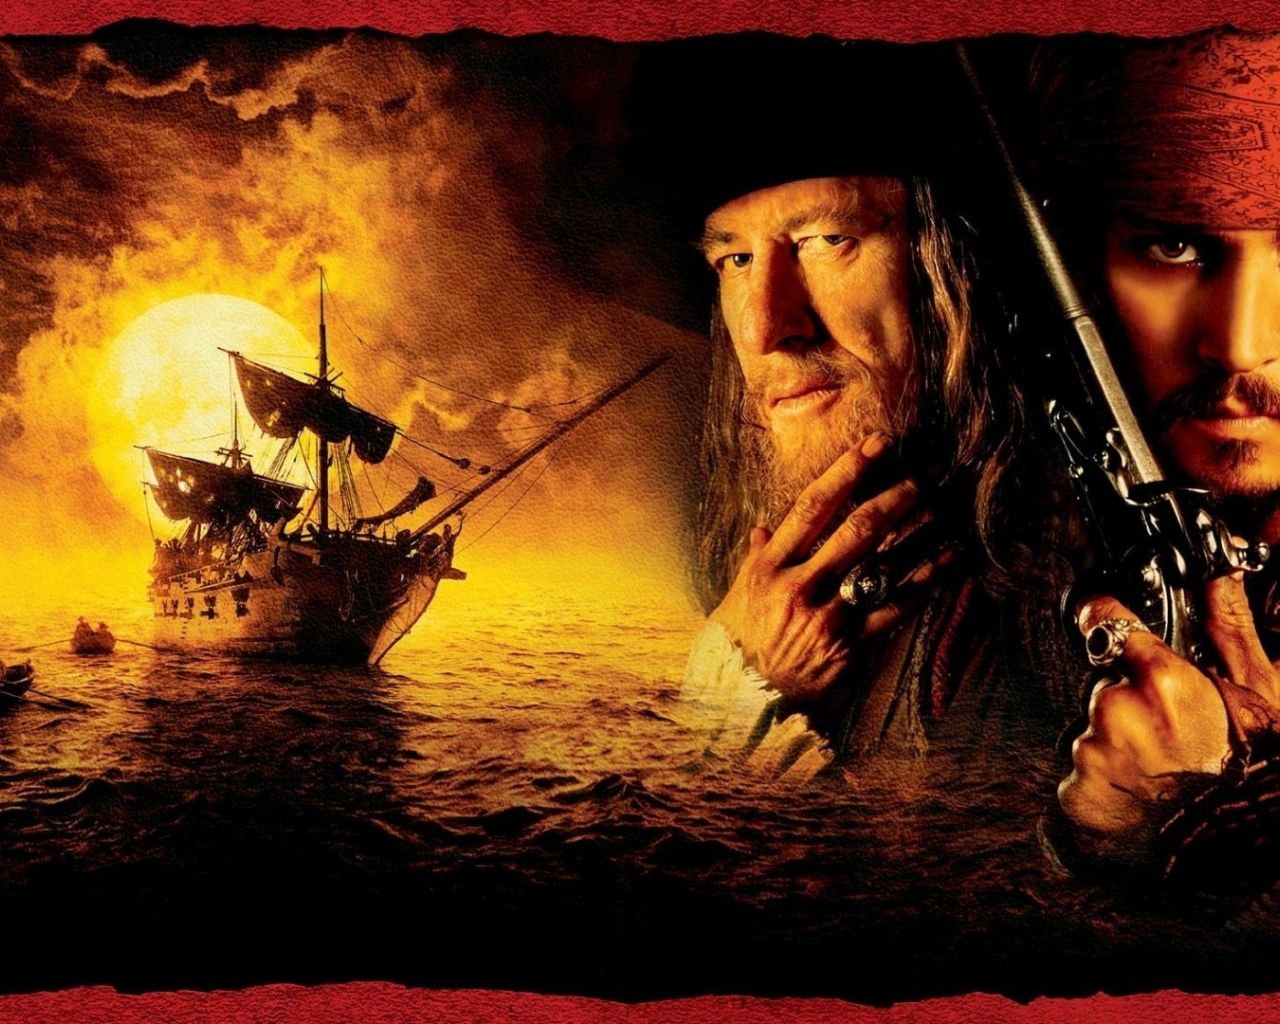 Free download Pirates of the Caribbean The Curse of the Black Pearl Wallpaper 2jpg [1920x1080] for your Desktop, Mobile & Tablet. Explore The Black Pearl Wallpaper. The Black Pearl